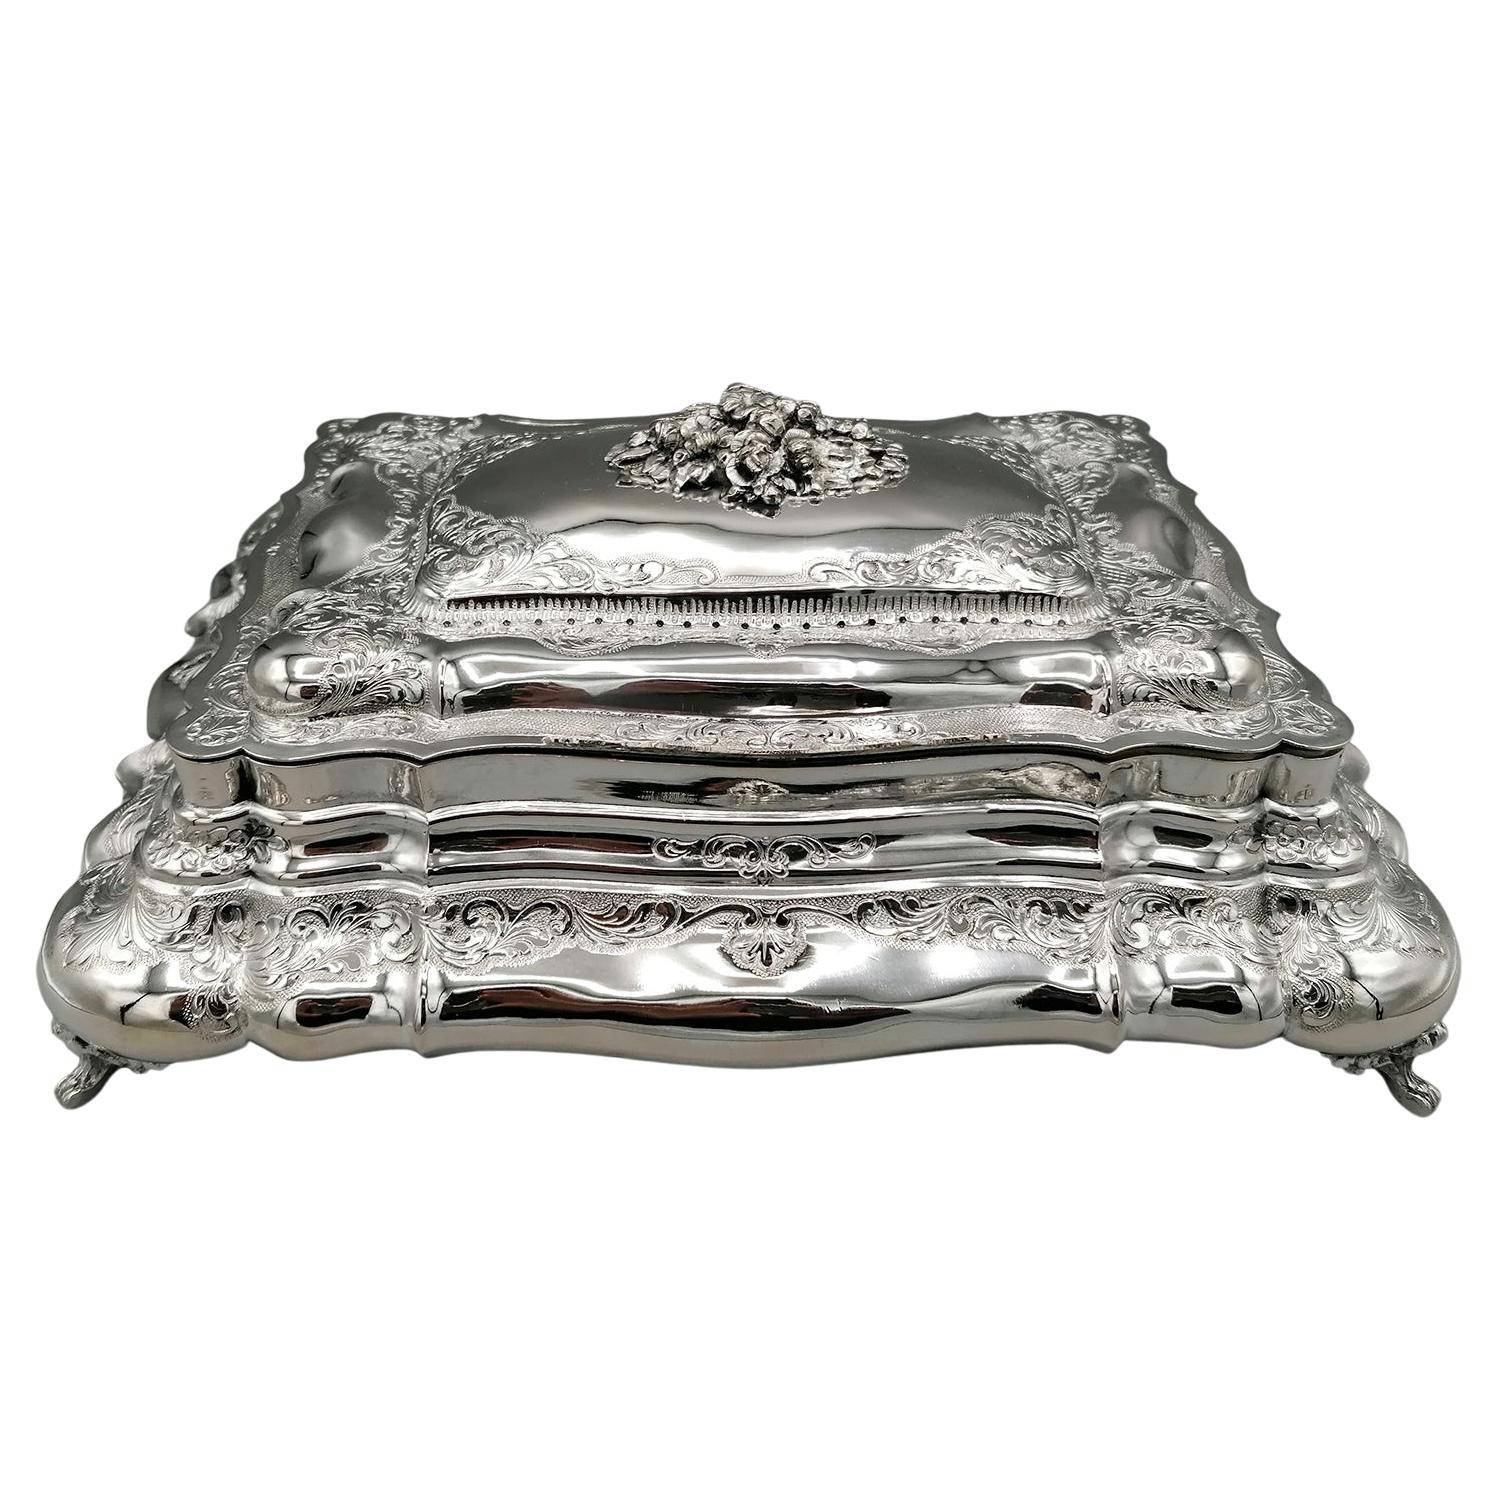 19th Century Italian Baroque Style Solid Silver Hand Made Jewellery Box Case